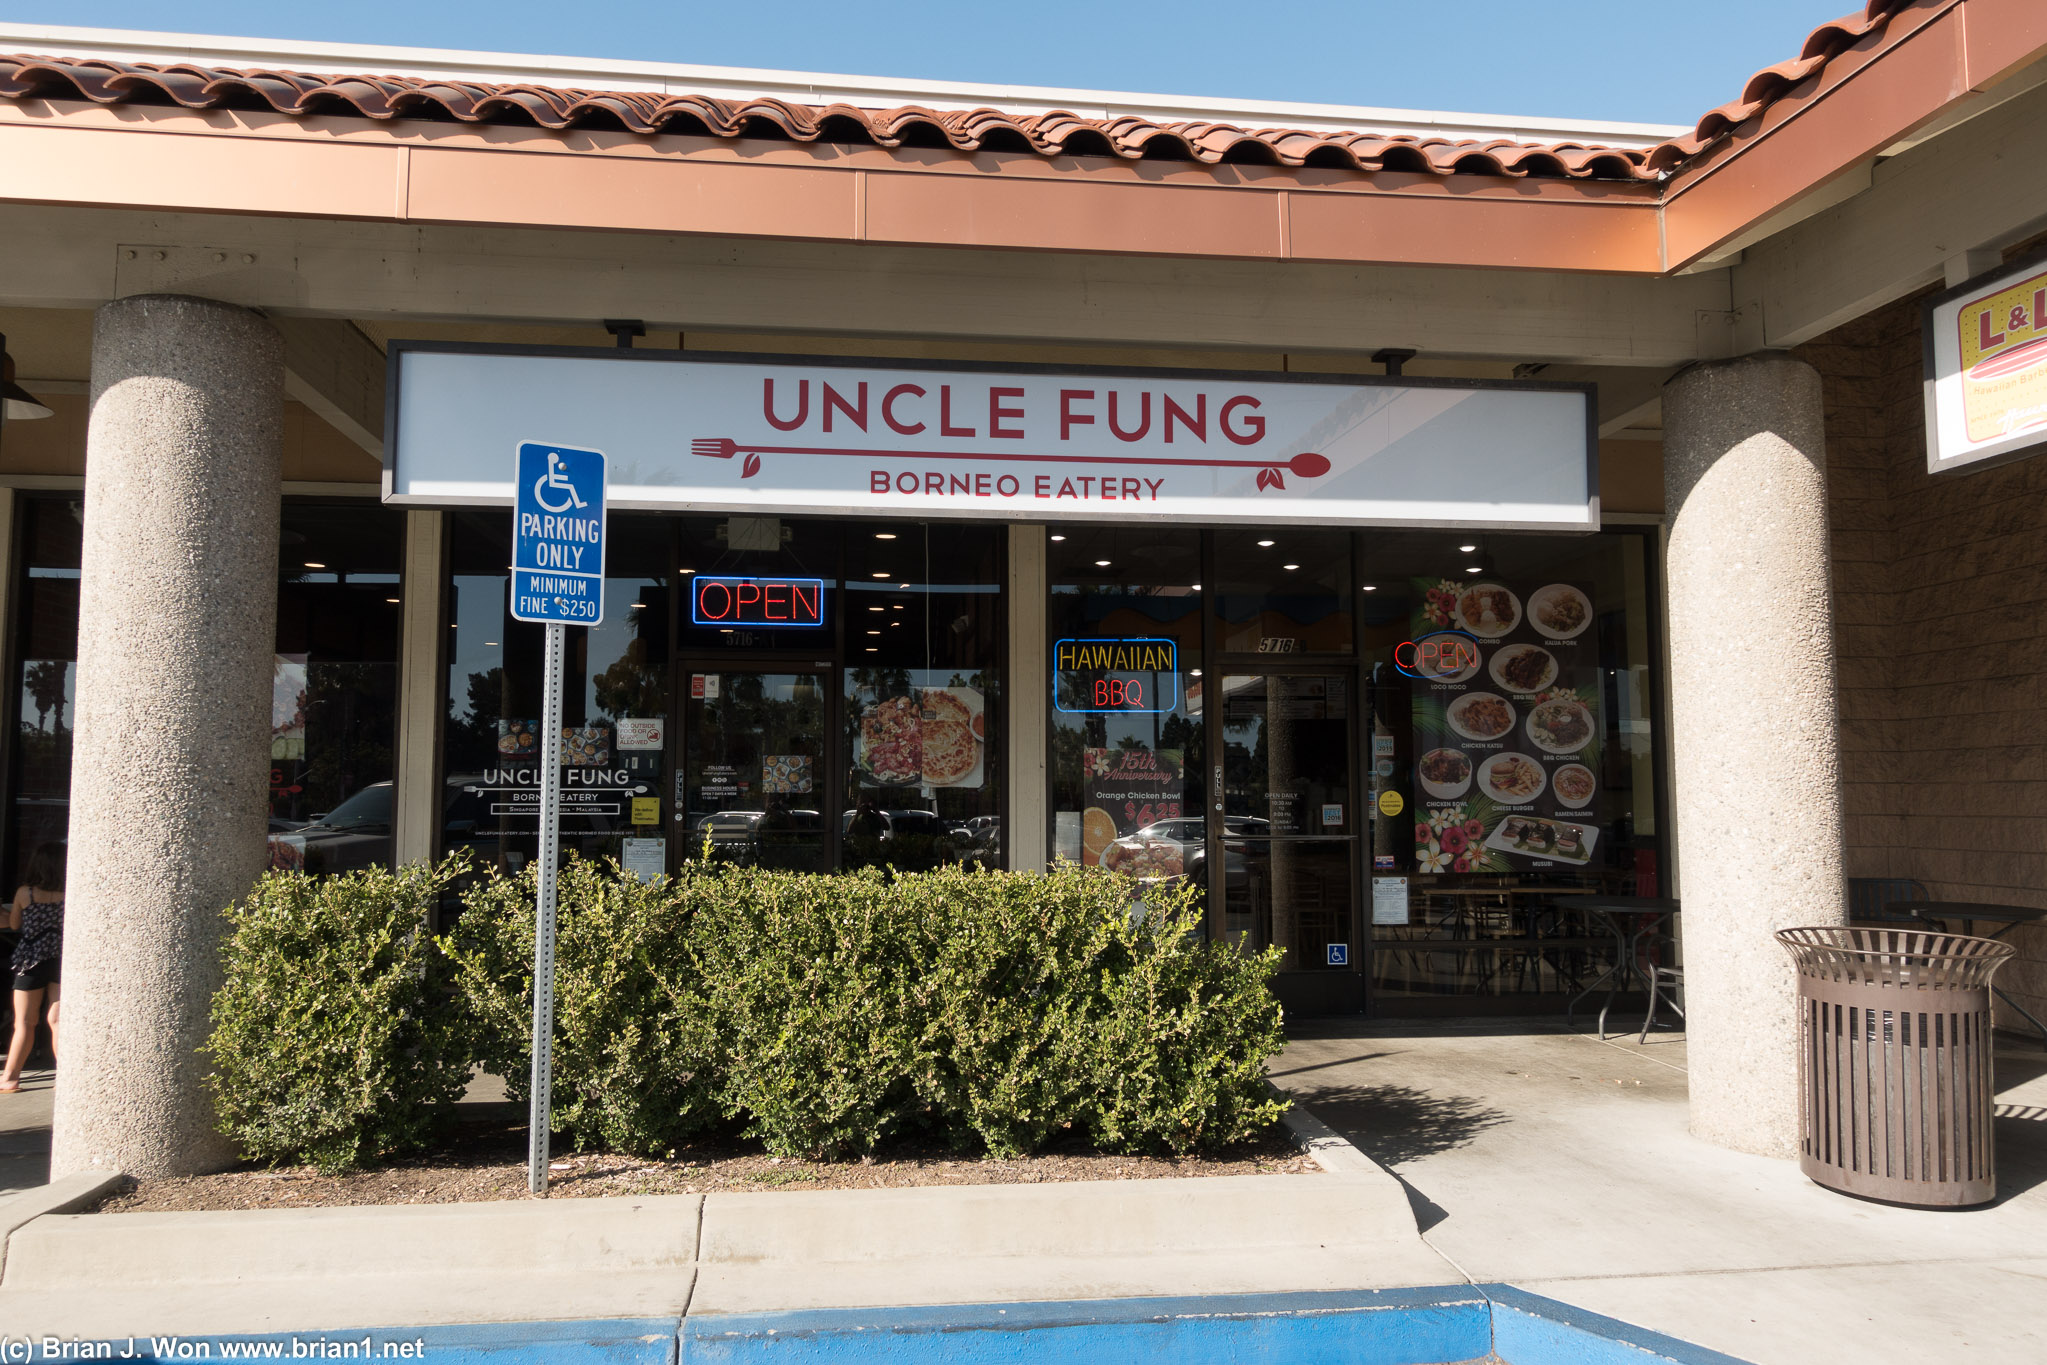 Uncle Fung Borneo Eatery.